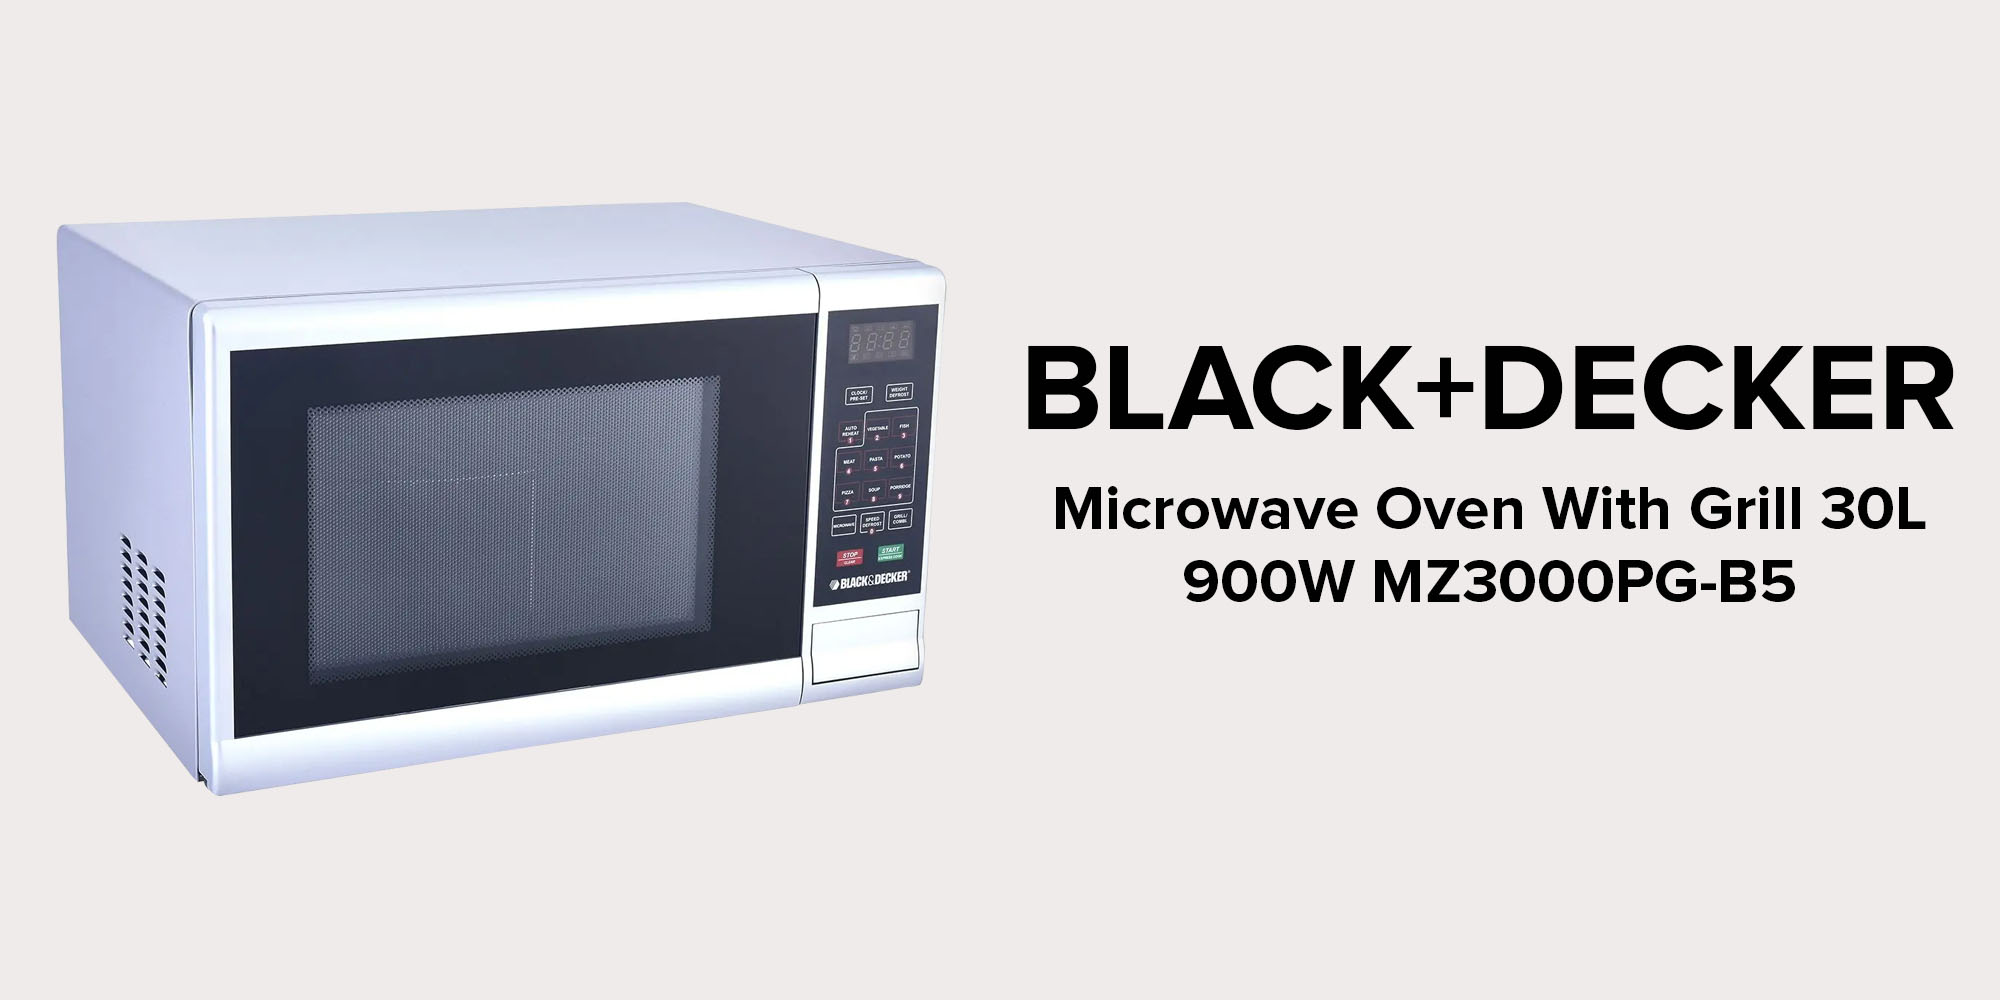 Black & Decker Mz3000pg-b5 | black & decker mz3000pg-b5 30 liter microwave oven